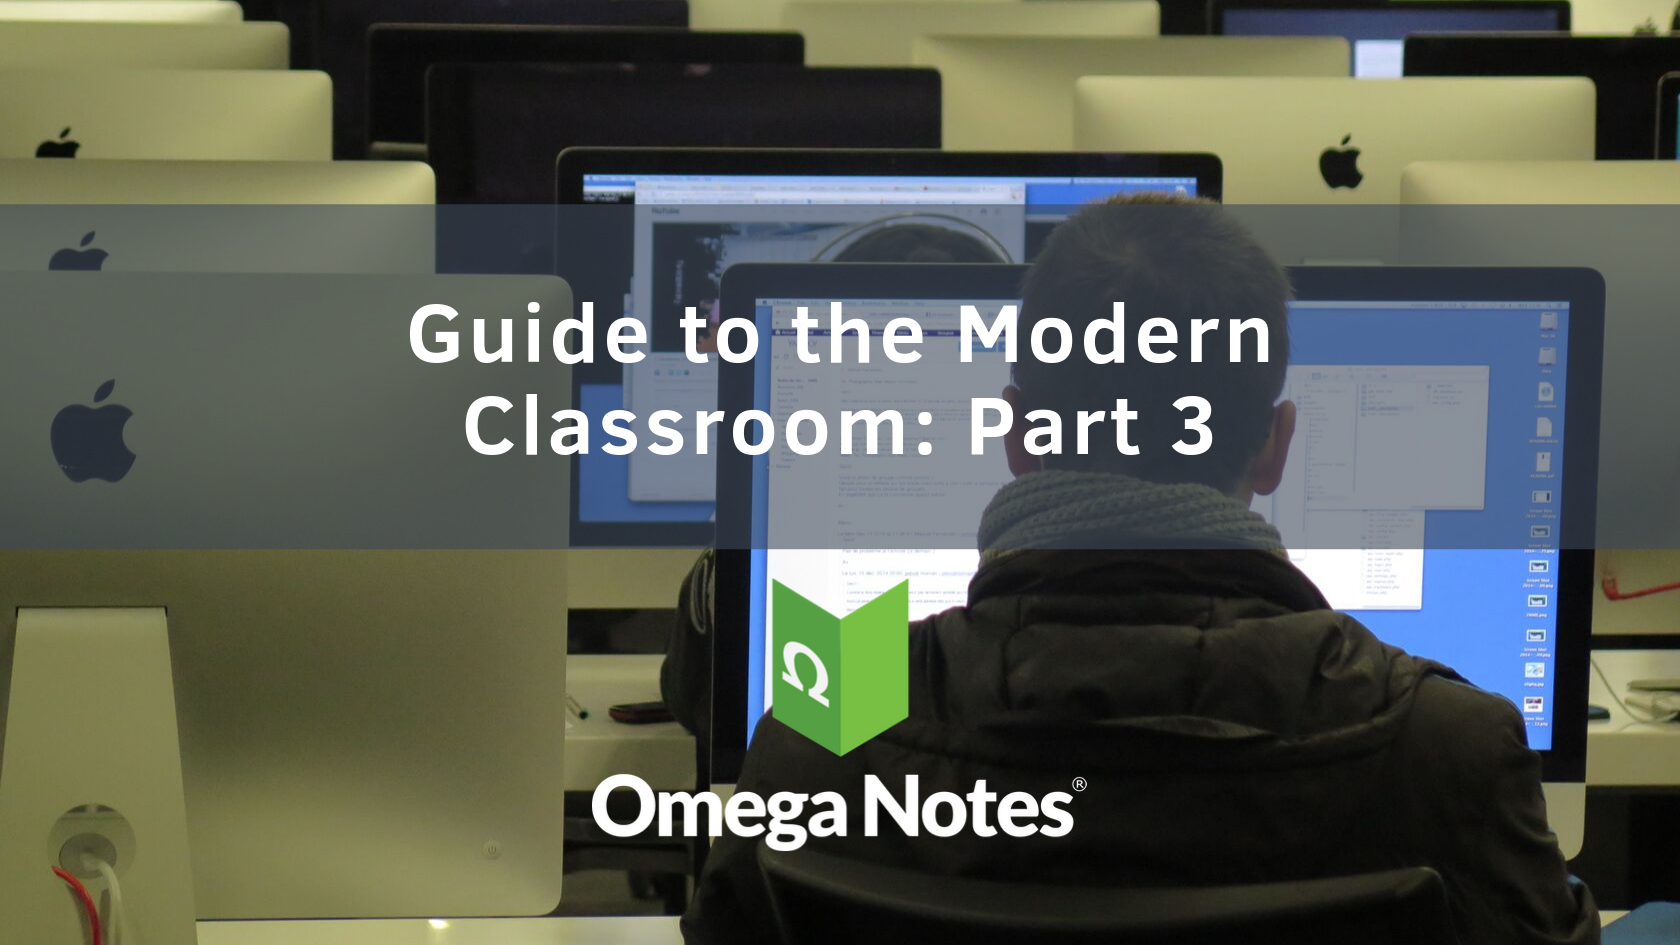 Guide to the Modern Classroom Part 3